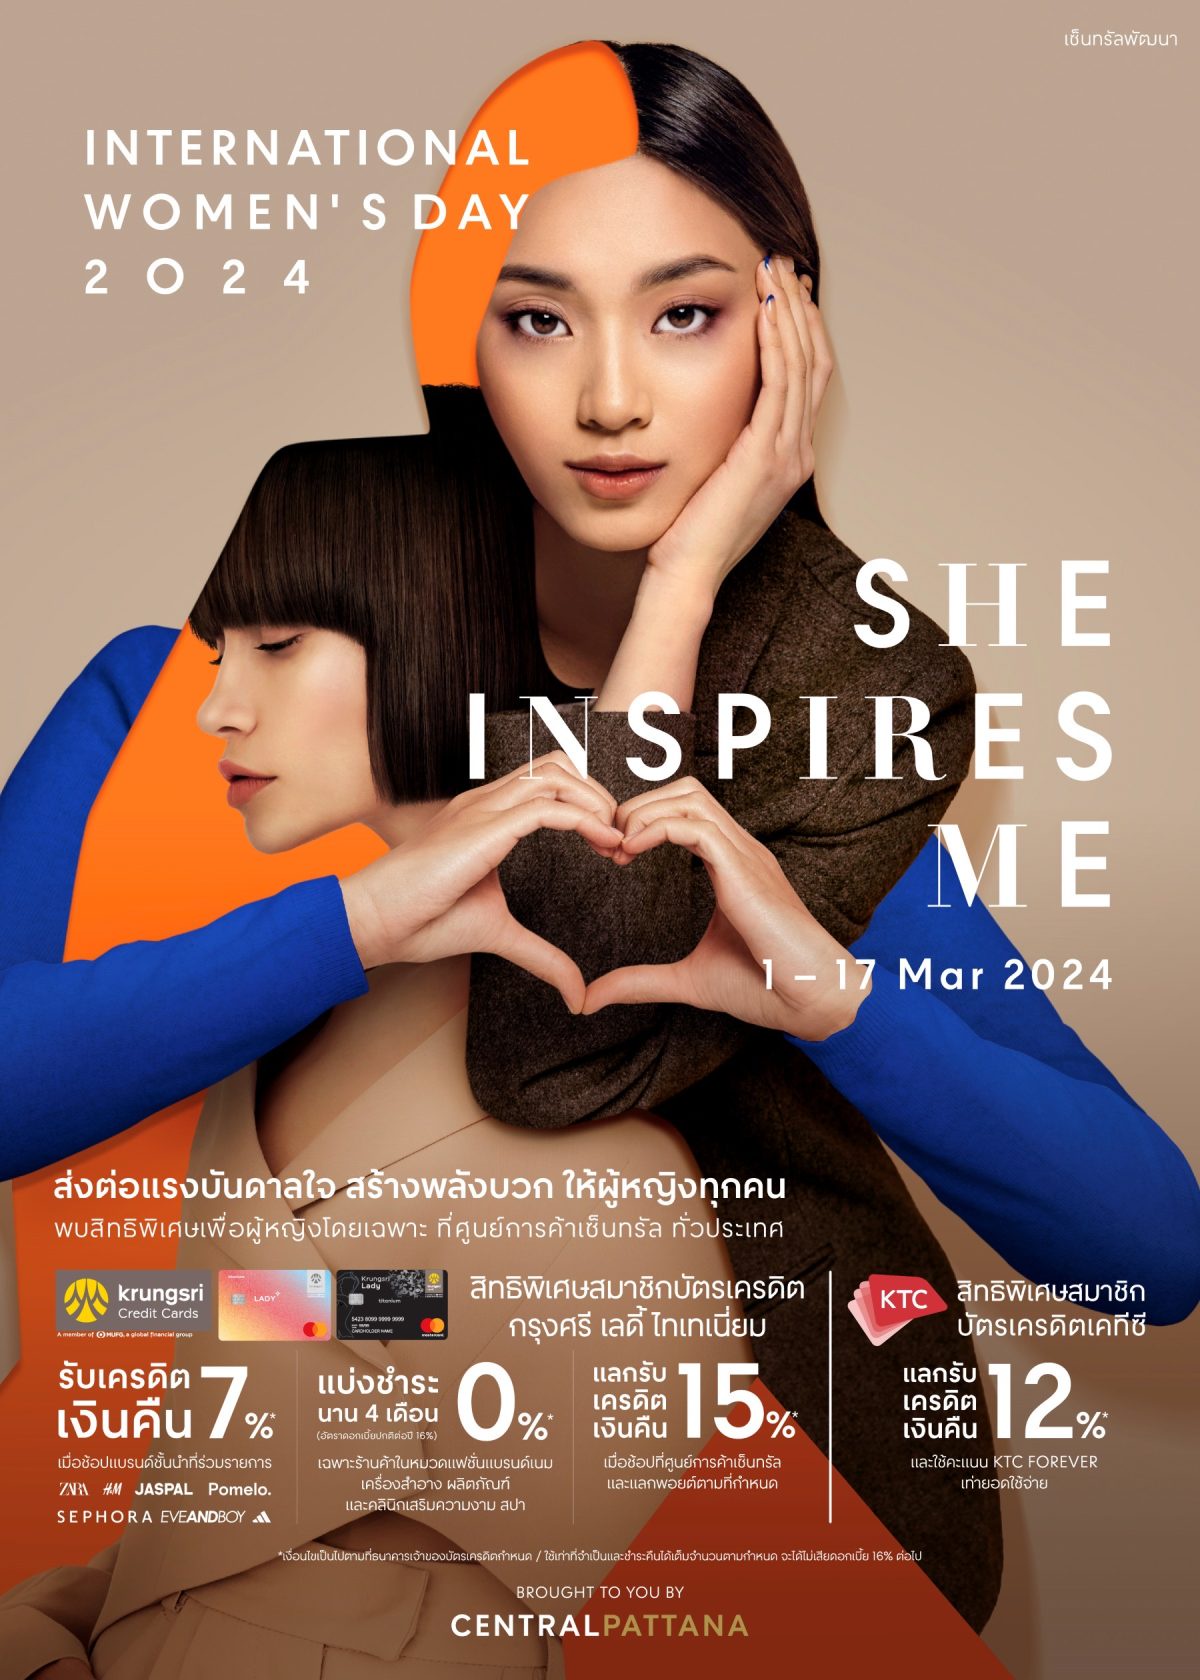 Central Pattana celebrates International Women's Day 8 March in 'She Inspires Me' campaign, believing every woman is outstanding and able to show their talent anywhere